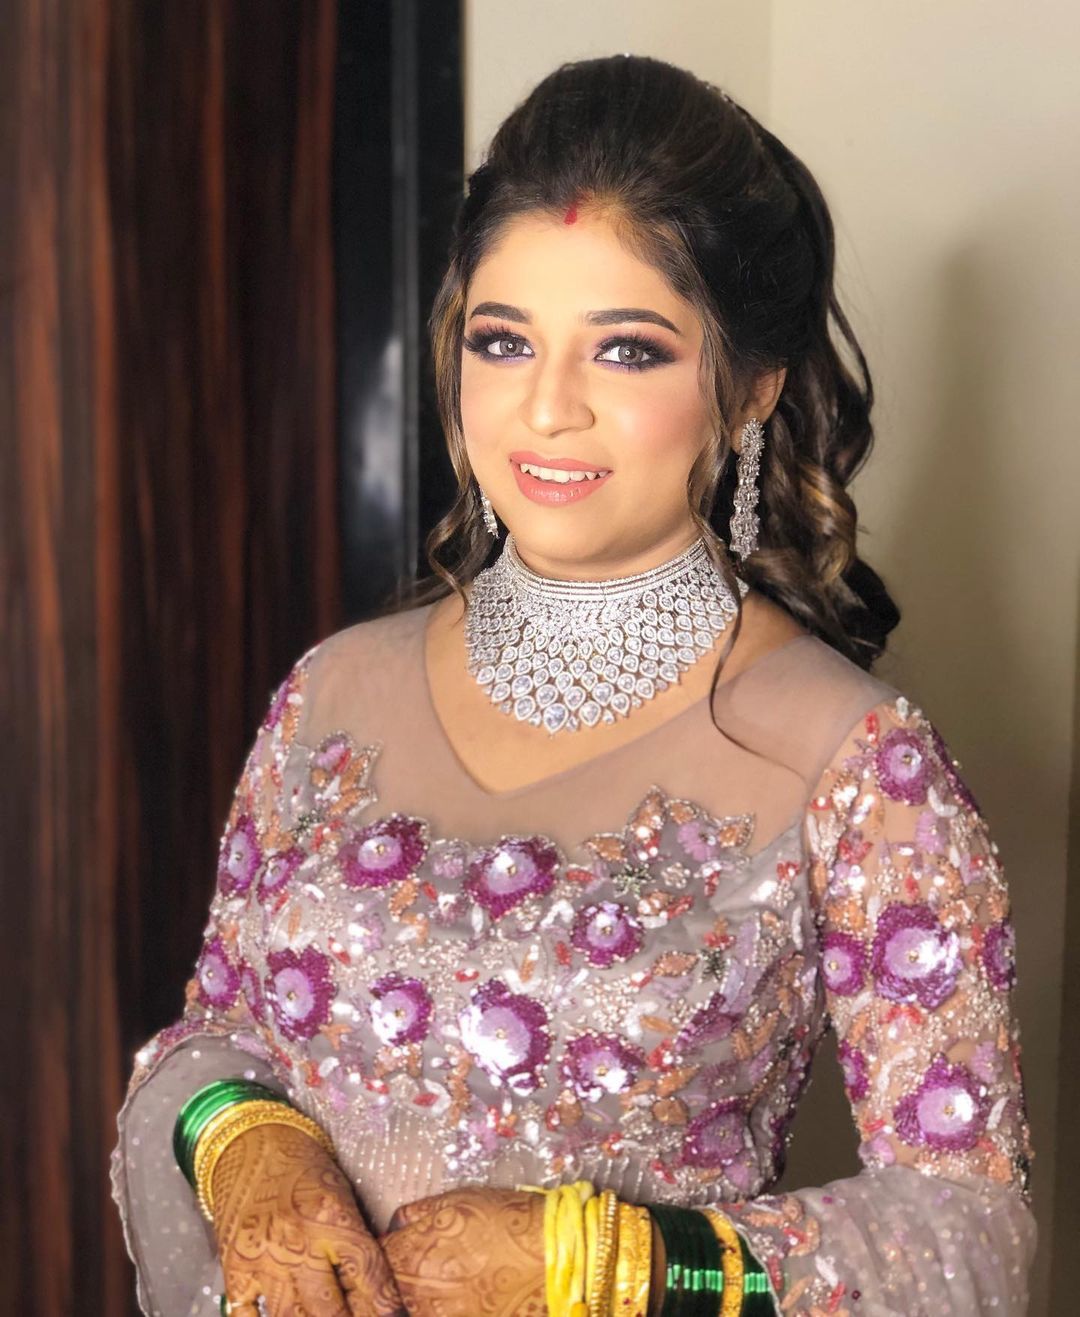 Makeup by Vejetha Anand - Shimmery eyes, glowing skin, nude lips and this  spectacular bridal gown is the perfect look for a reception evening! Click  on ♥️and leave a comment if you